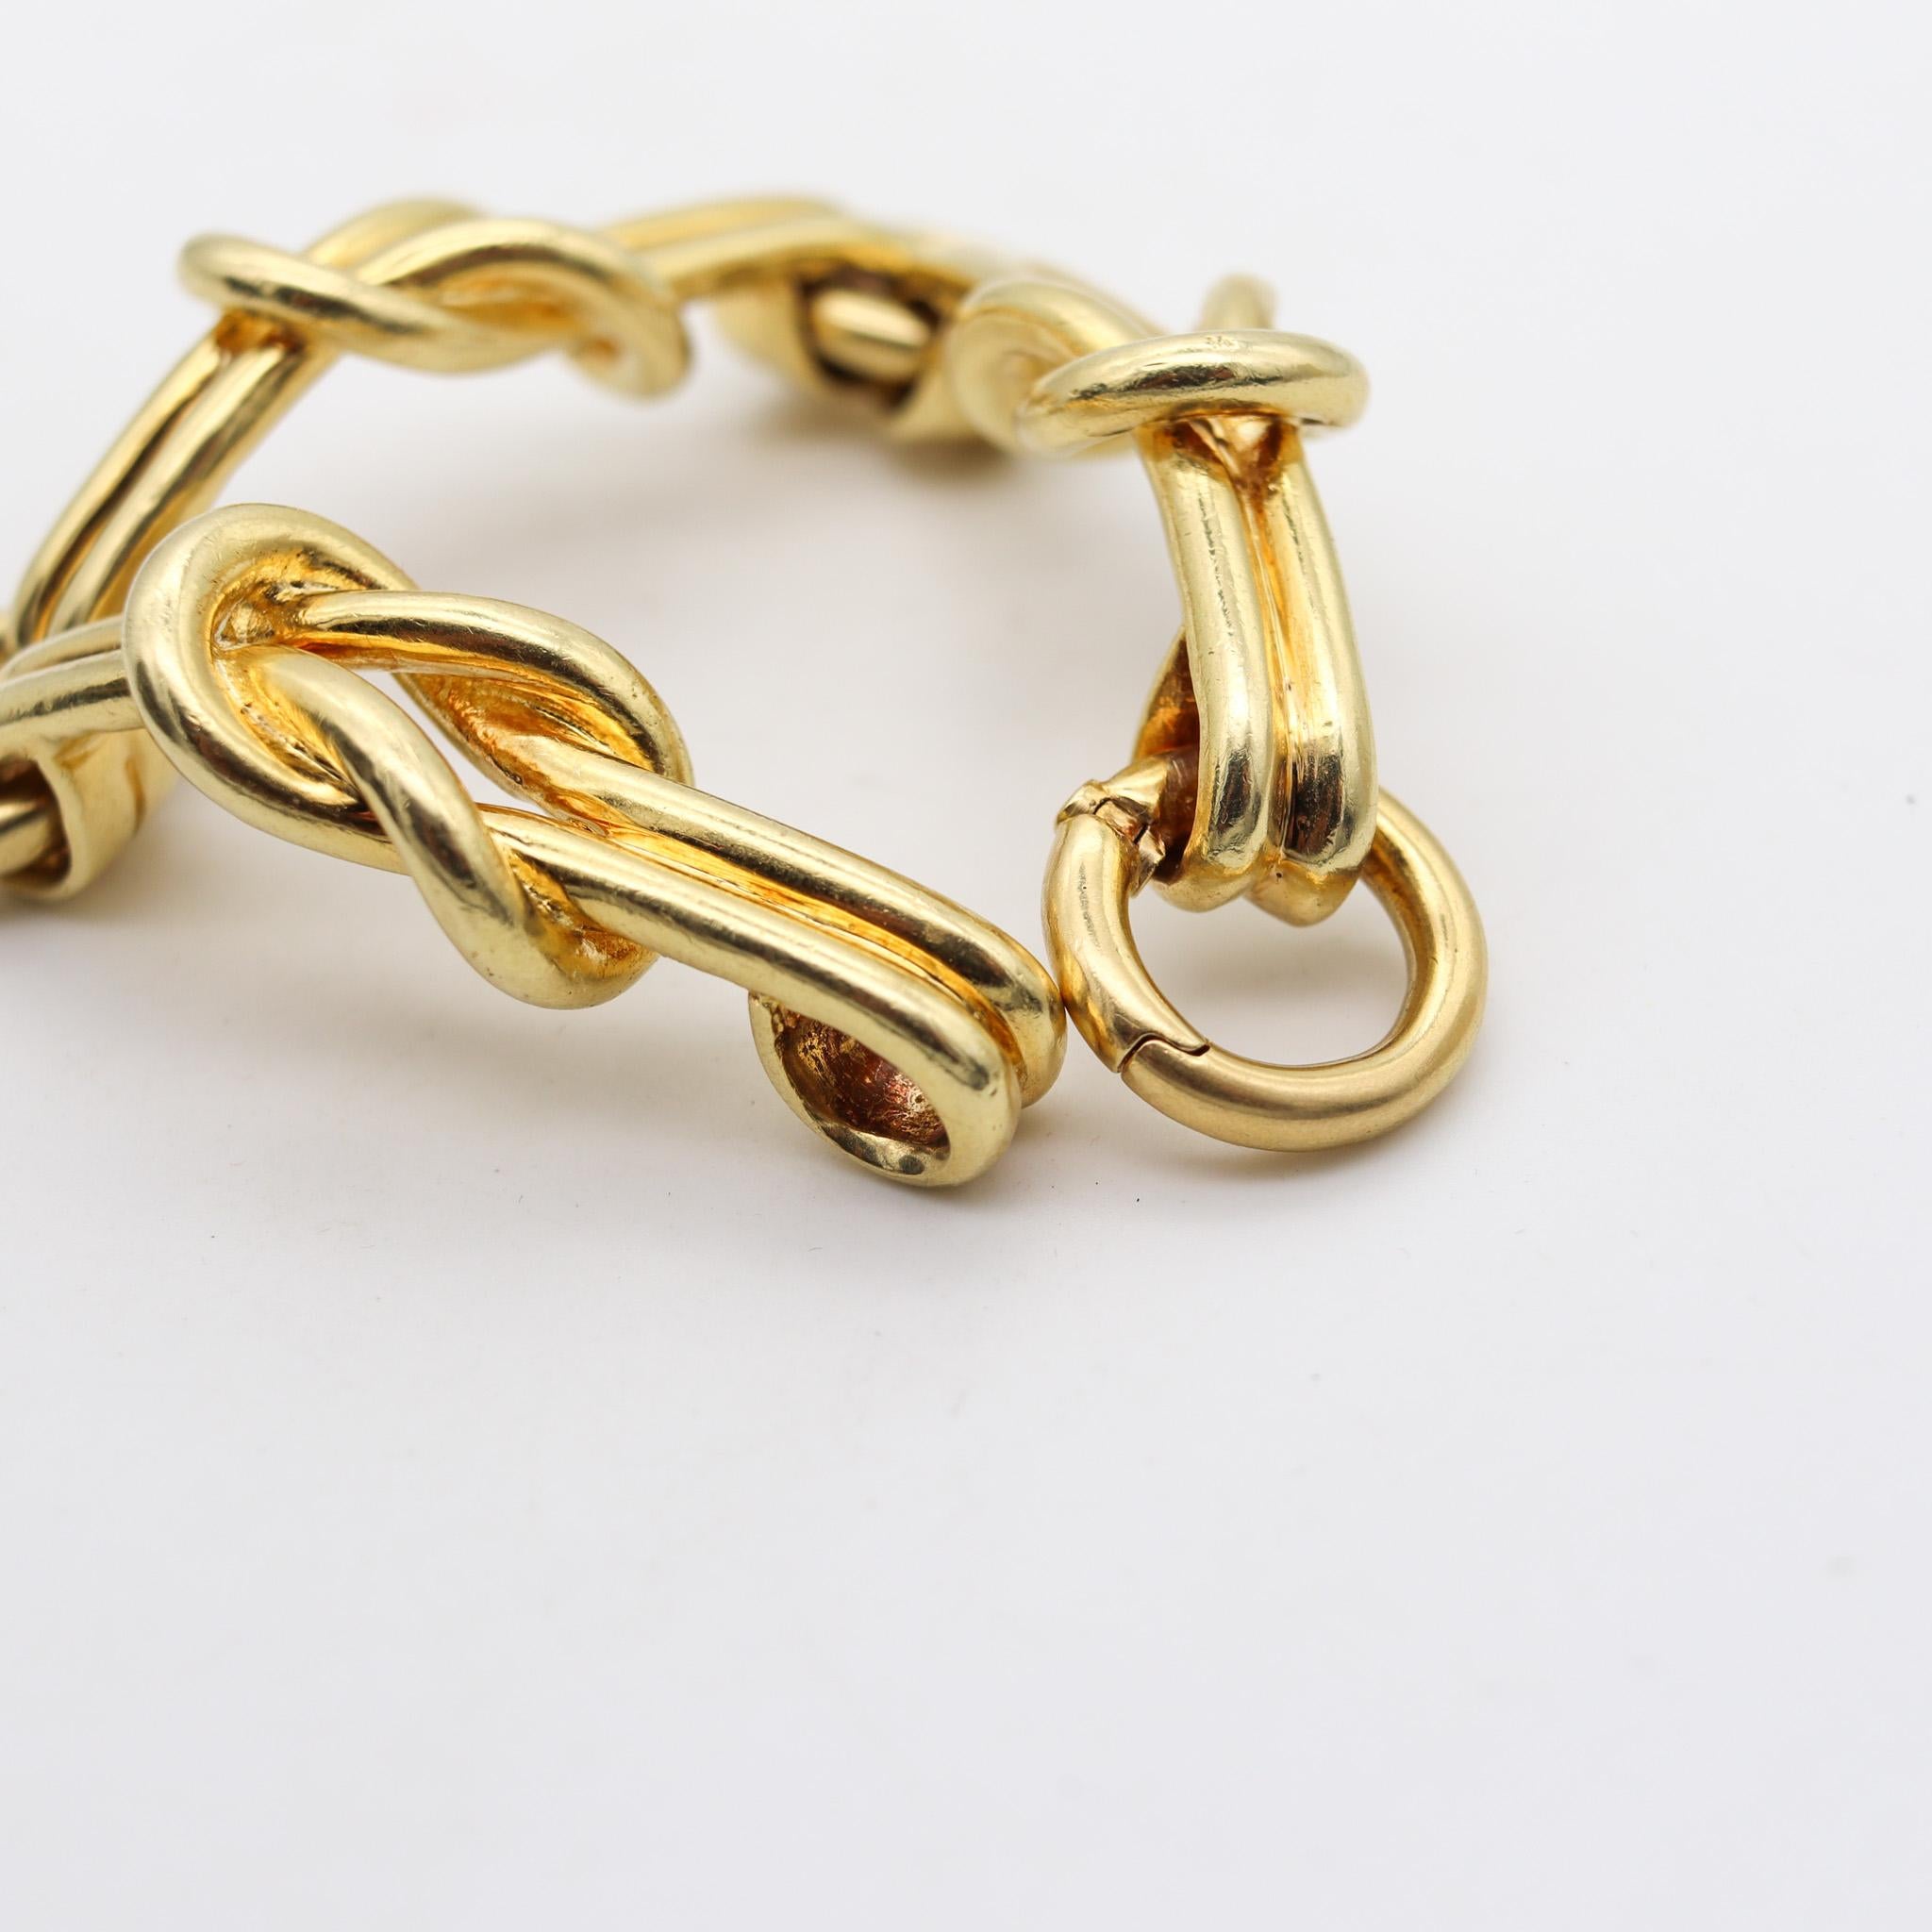 Cartier 1970 Hercules Knots Statement Links Bracelet In Solid 18Kt Yellow Gold For Sale 4